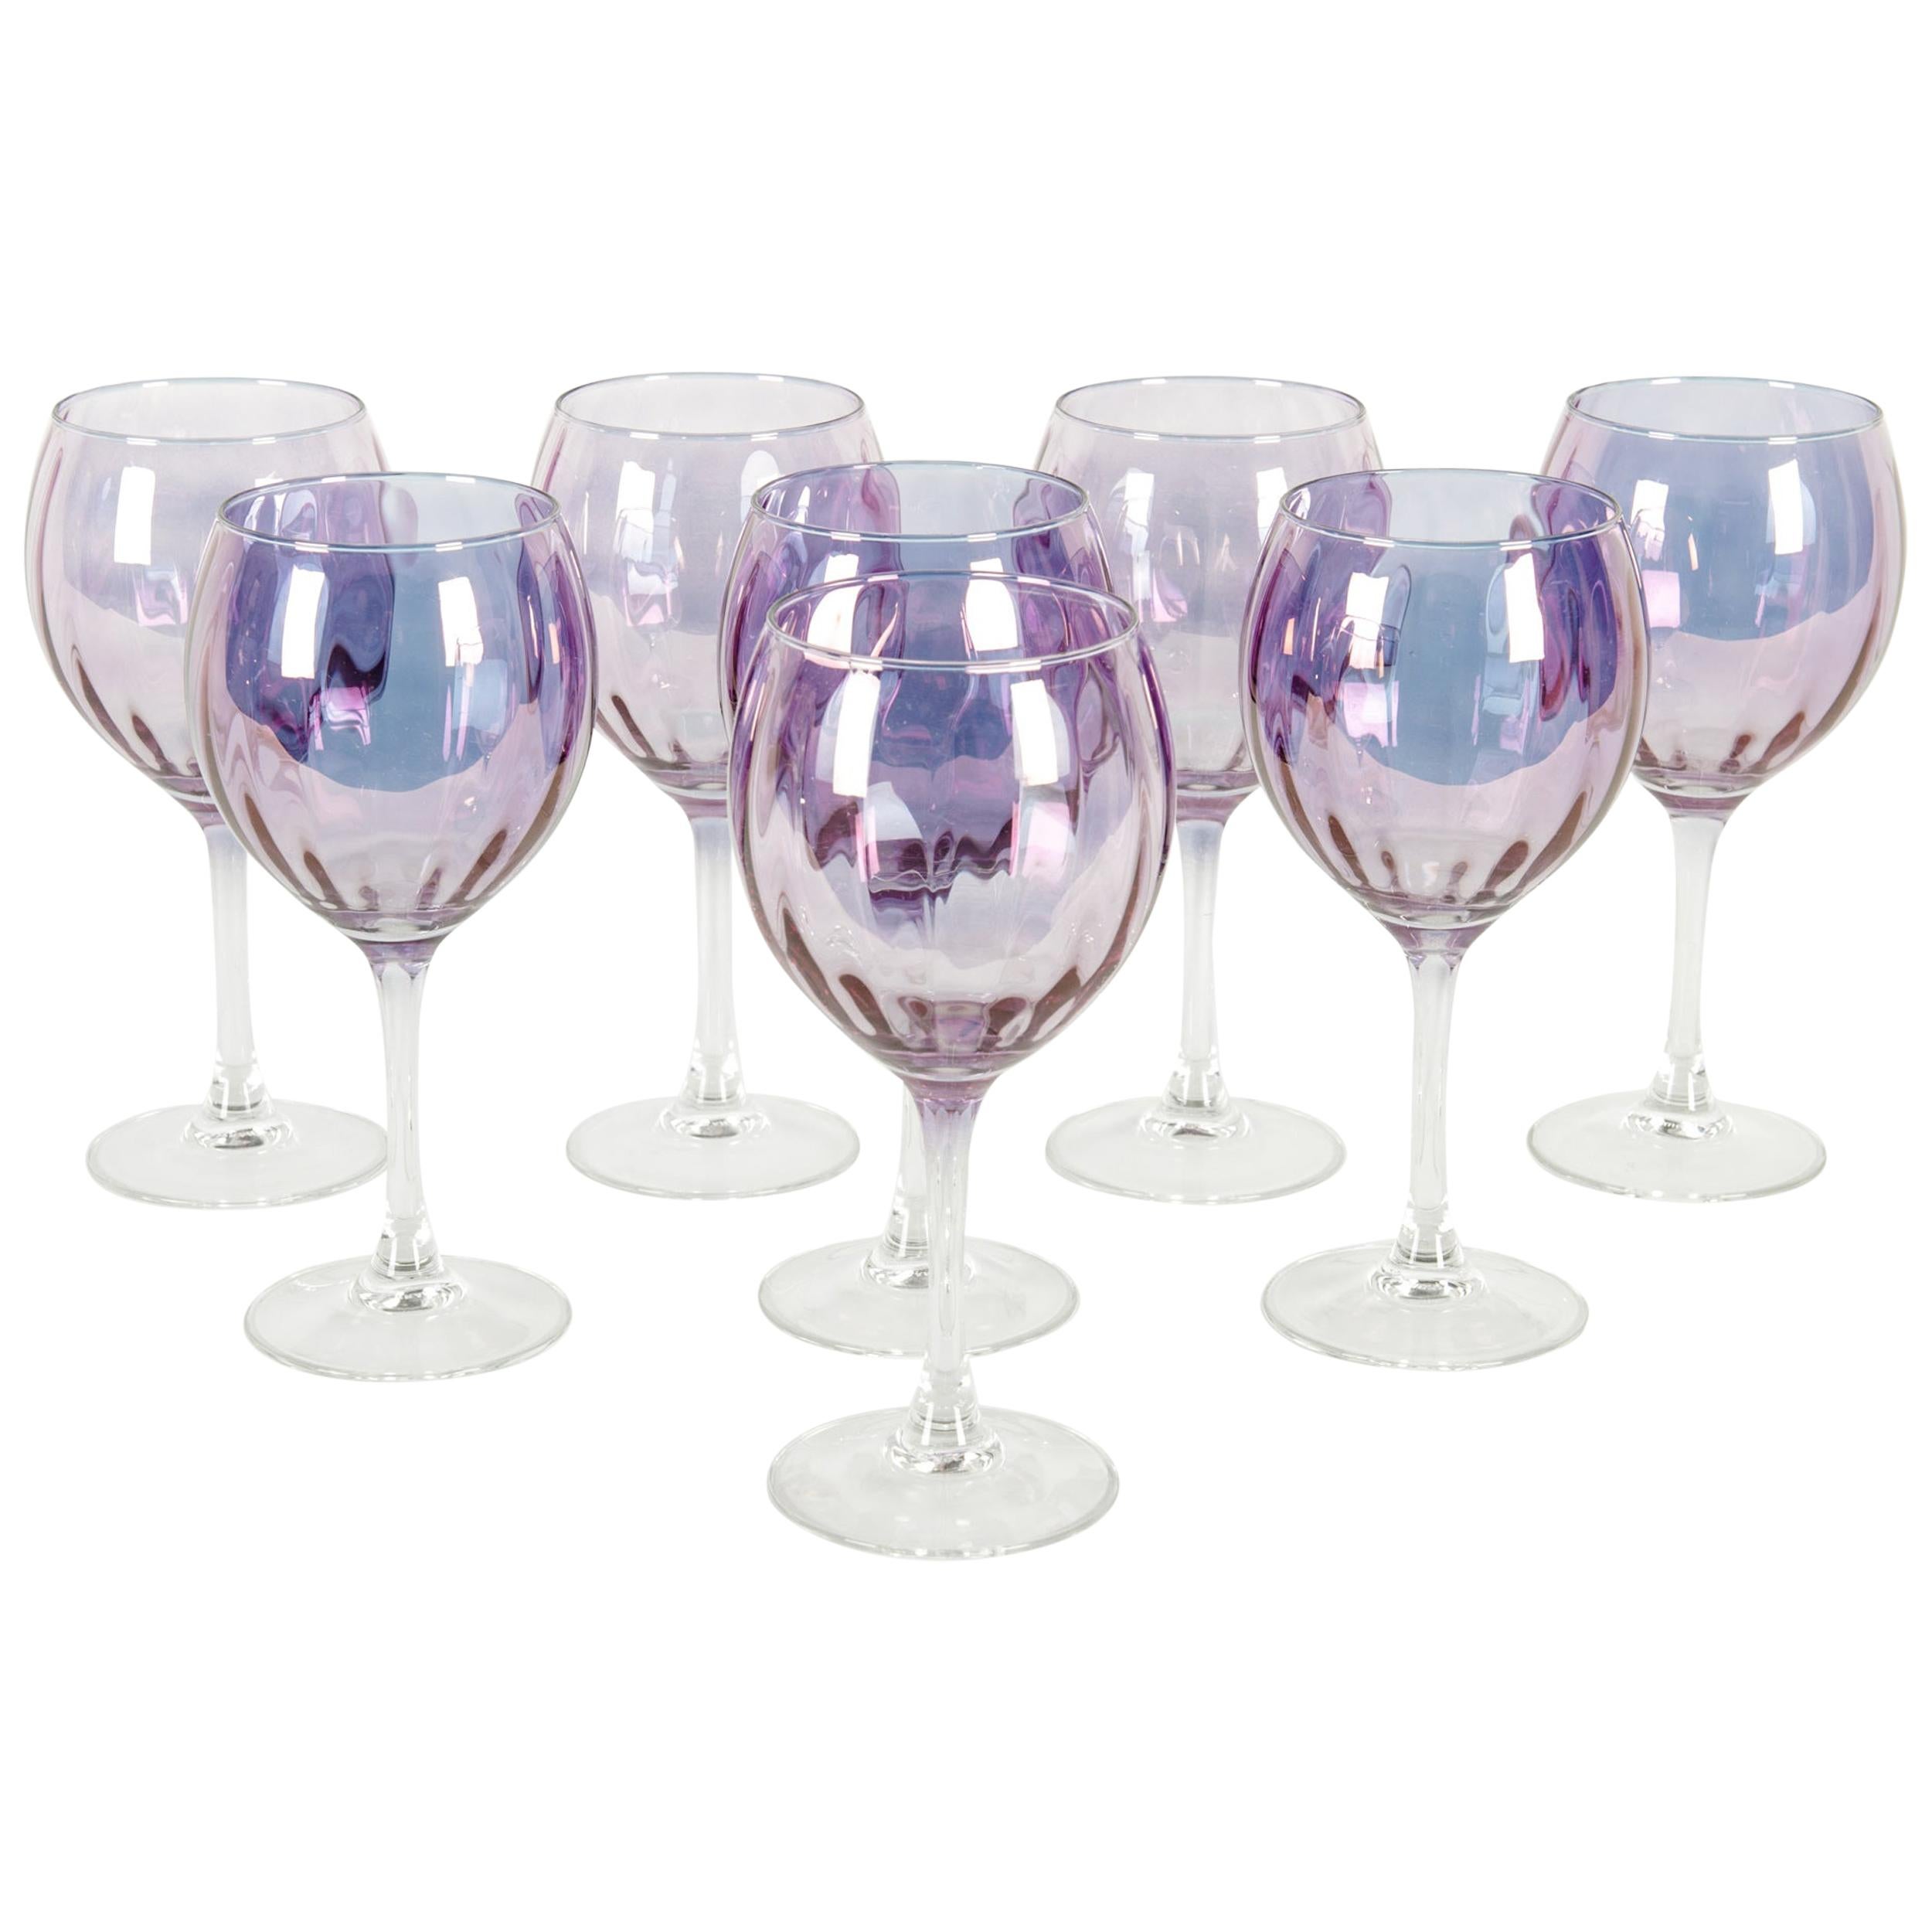 Mid-20th Century French Barware / Wine / Water Service / Eight People